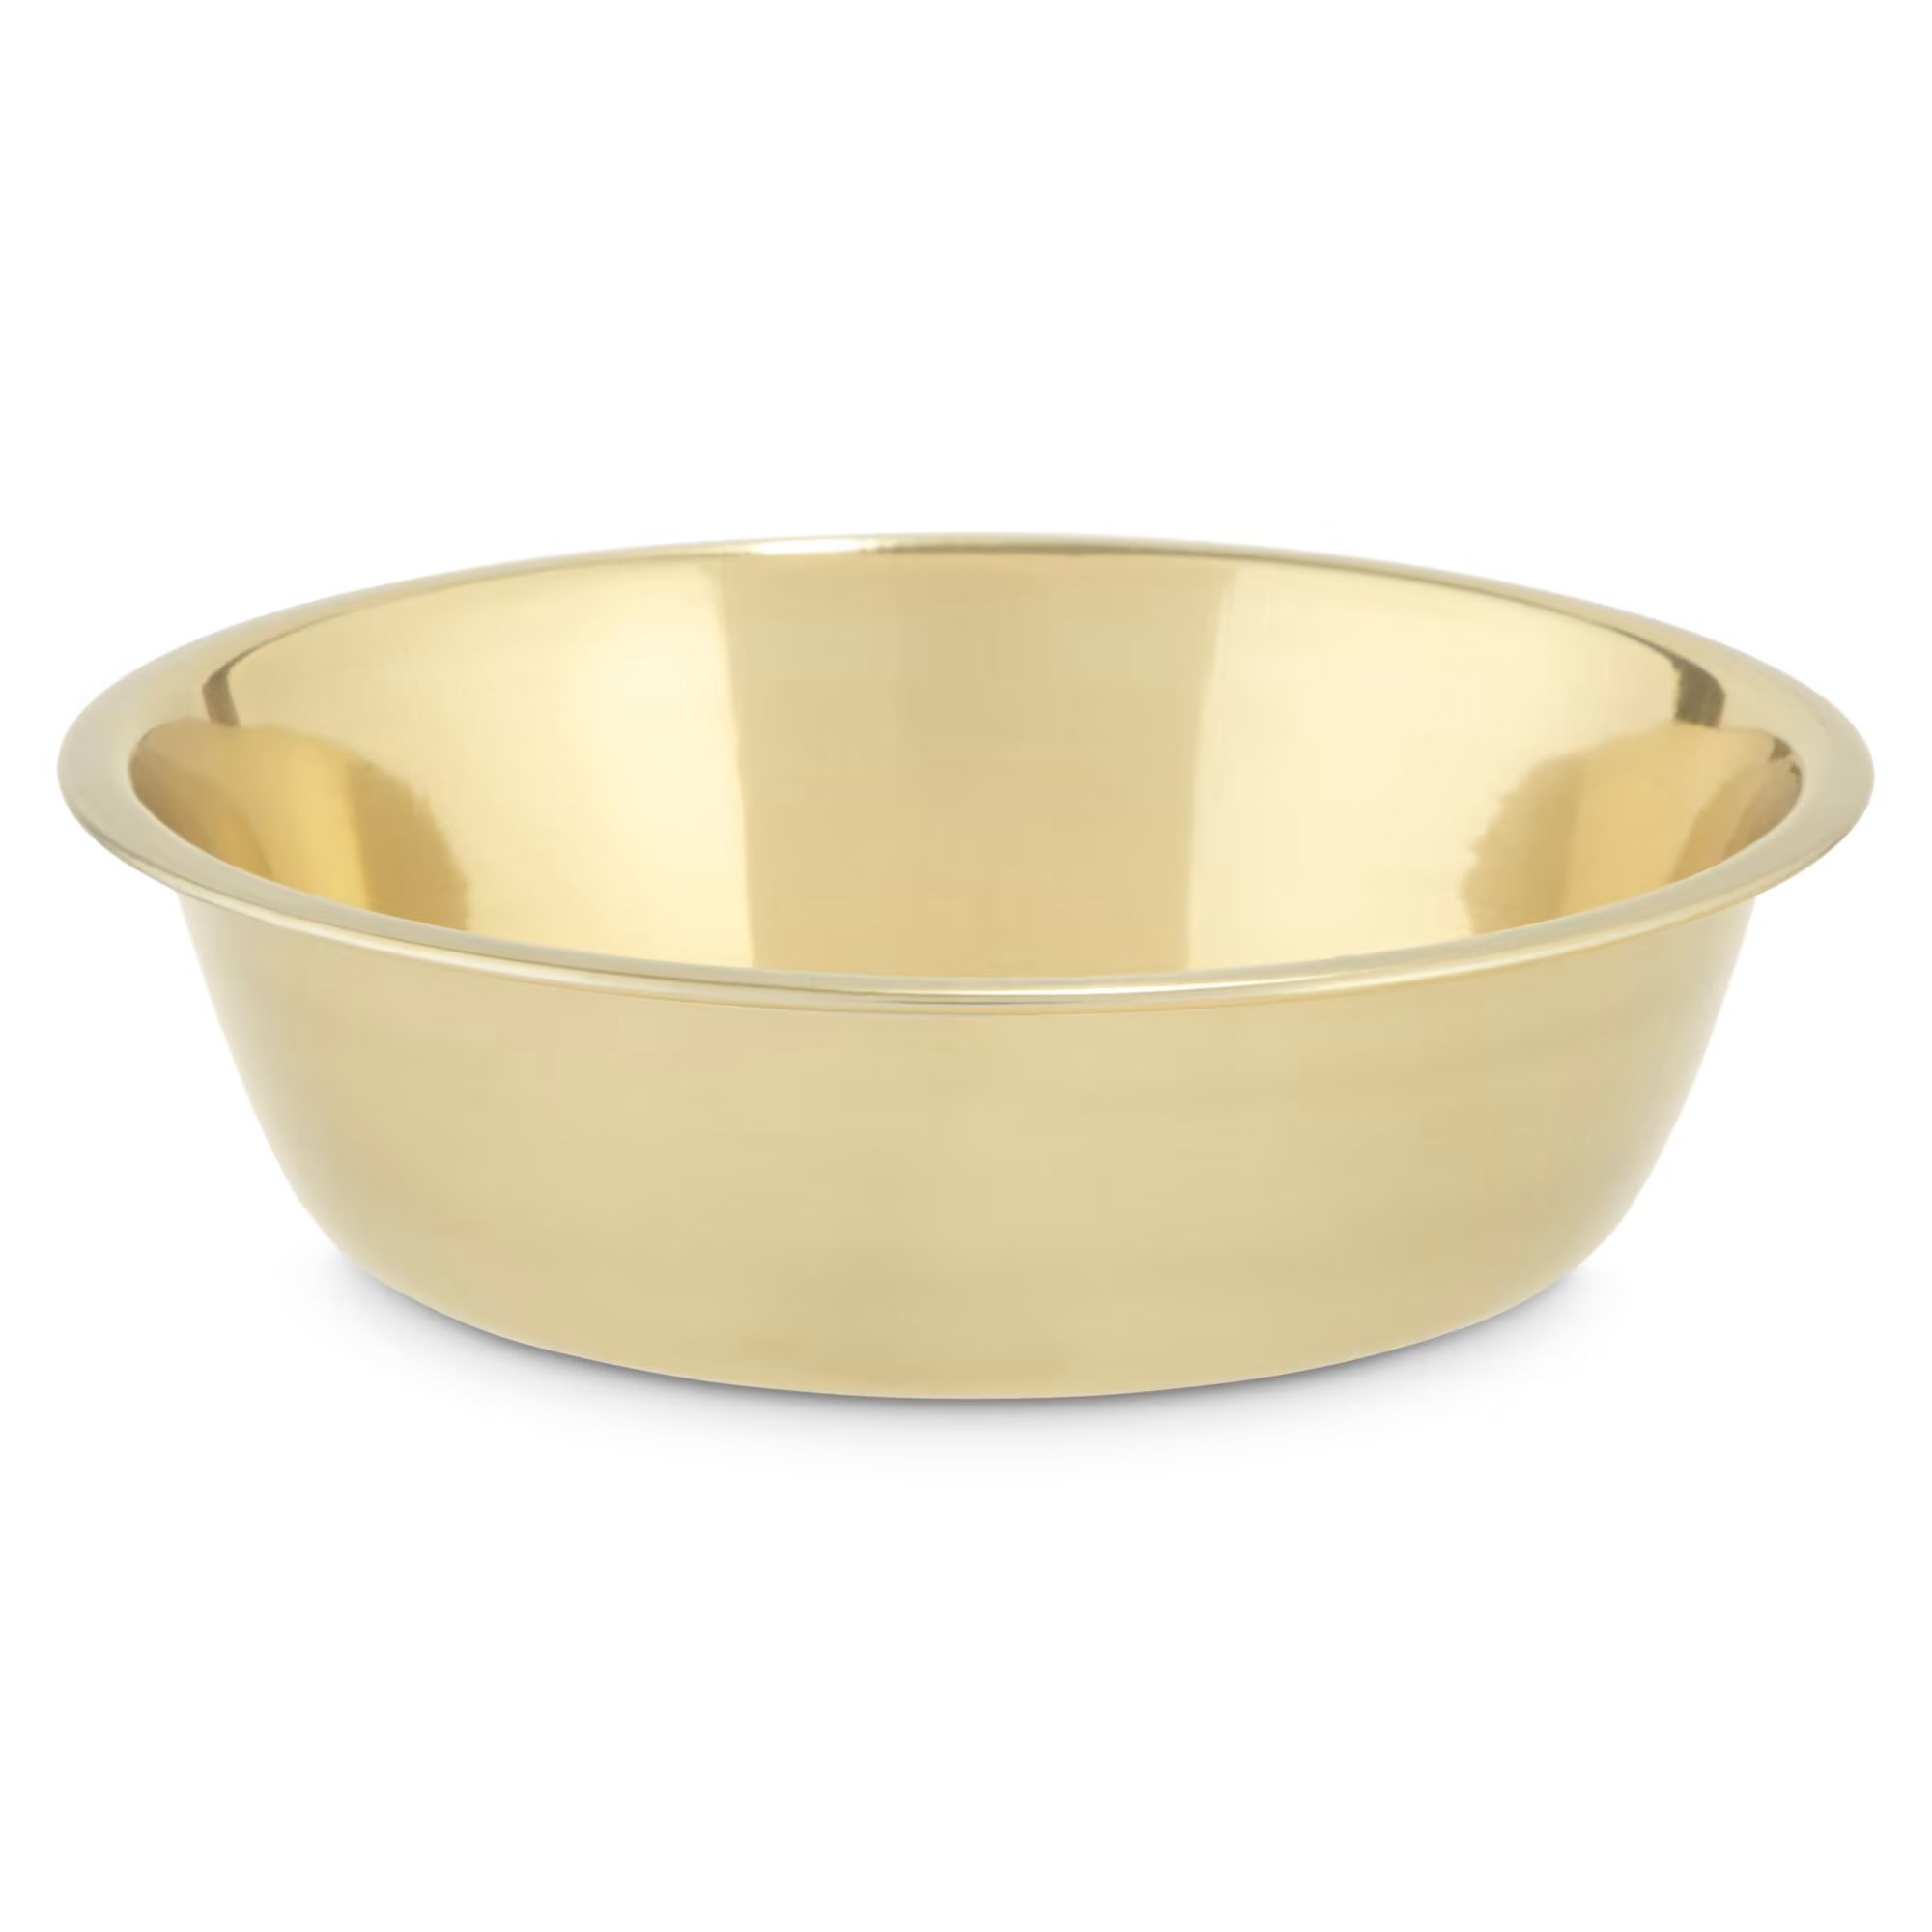 Harmony Gold Stainless Steel Dog Bowl, 1.75 Cup | Petco